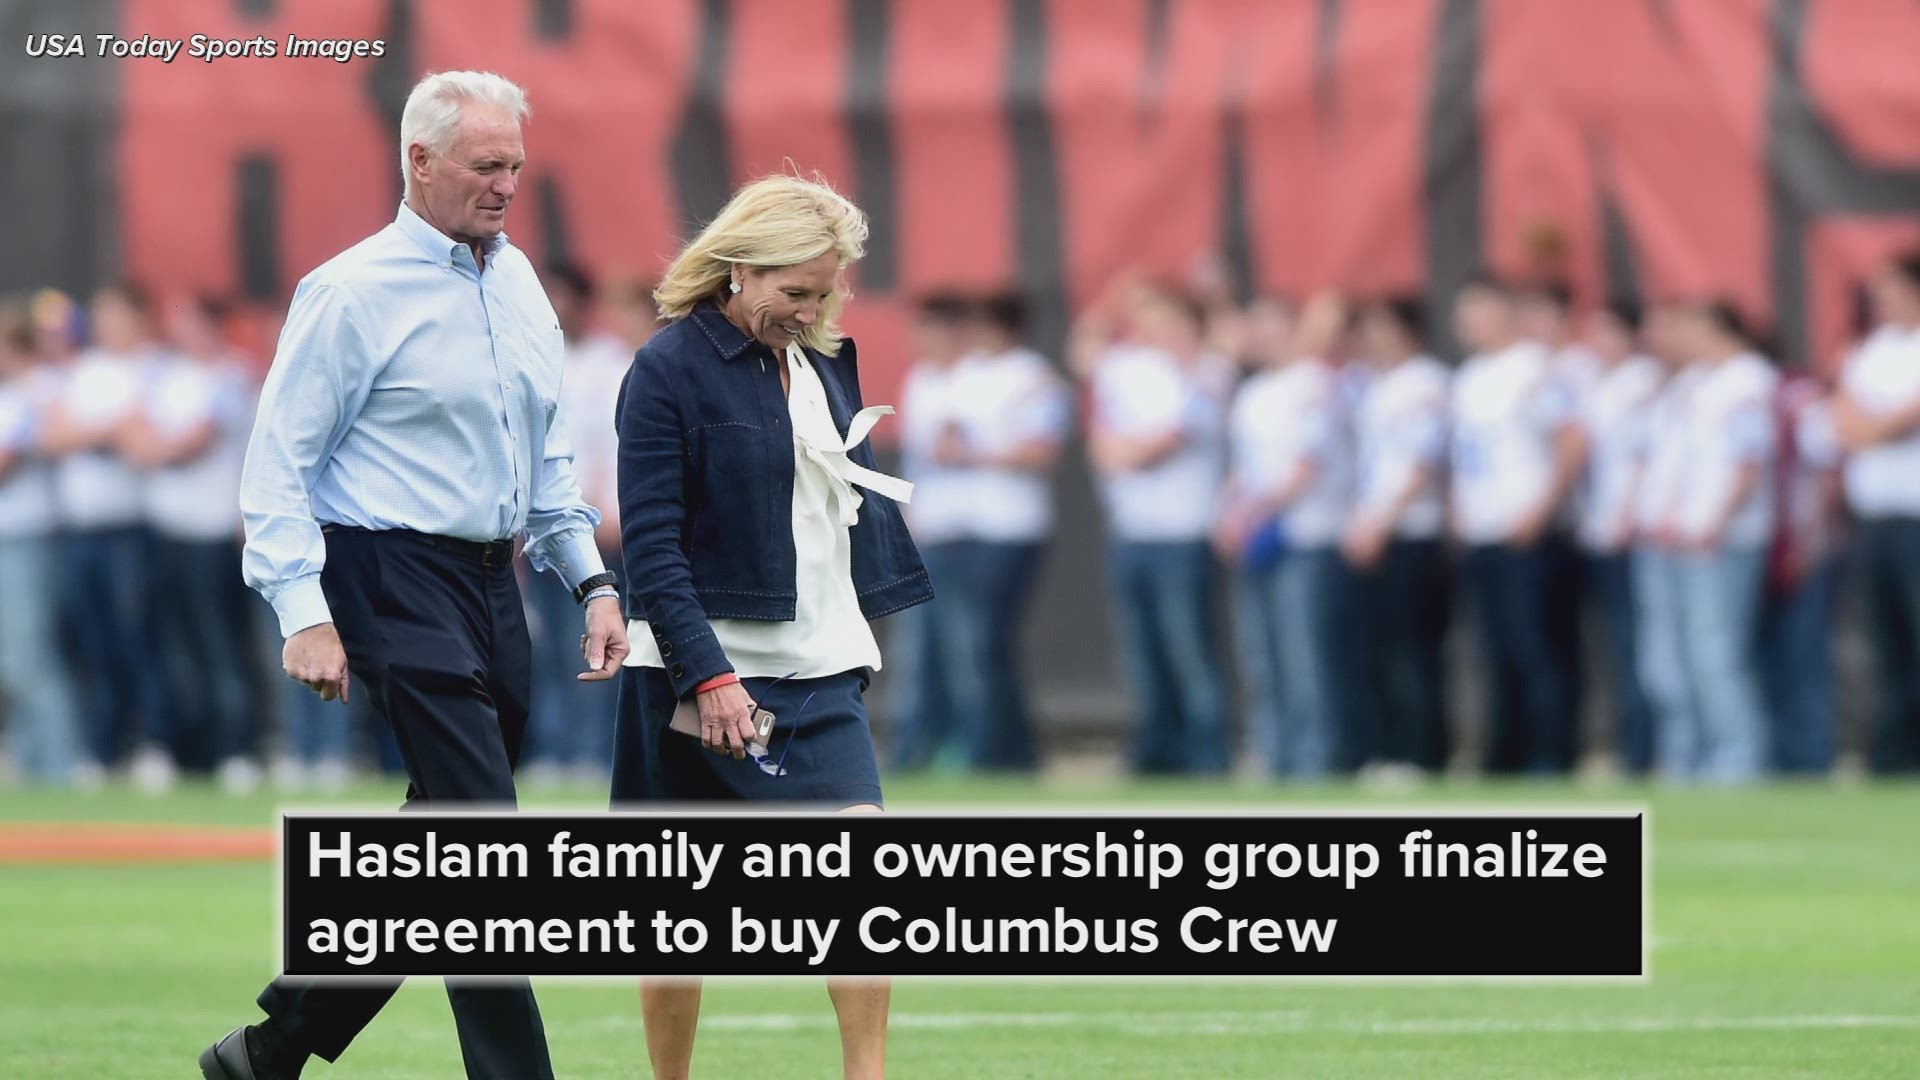 Cleveland Browns owners Jimmy and Dee Haslam are a part of the ownership group keeping the Columbus Crew SC in Ohio's capital city.